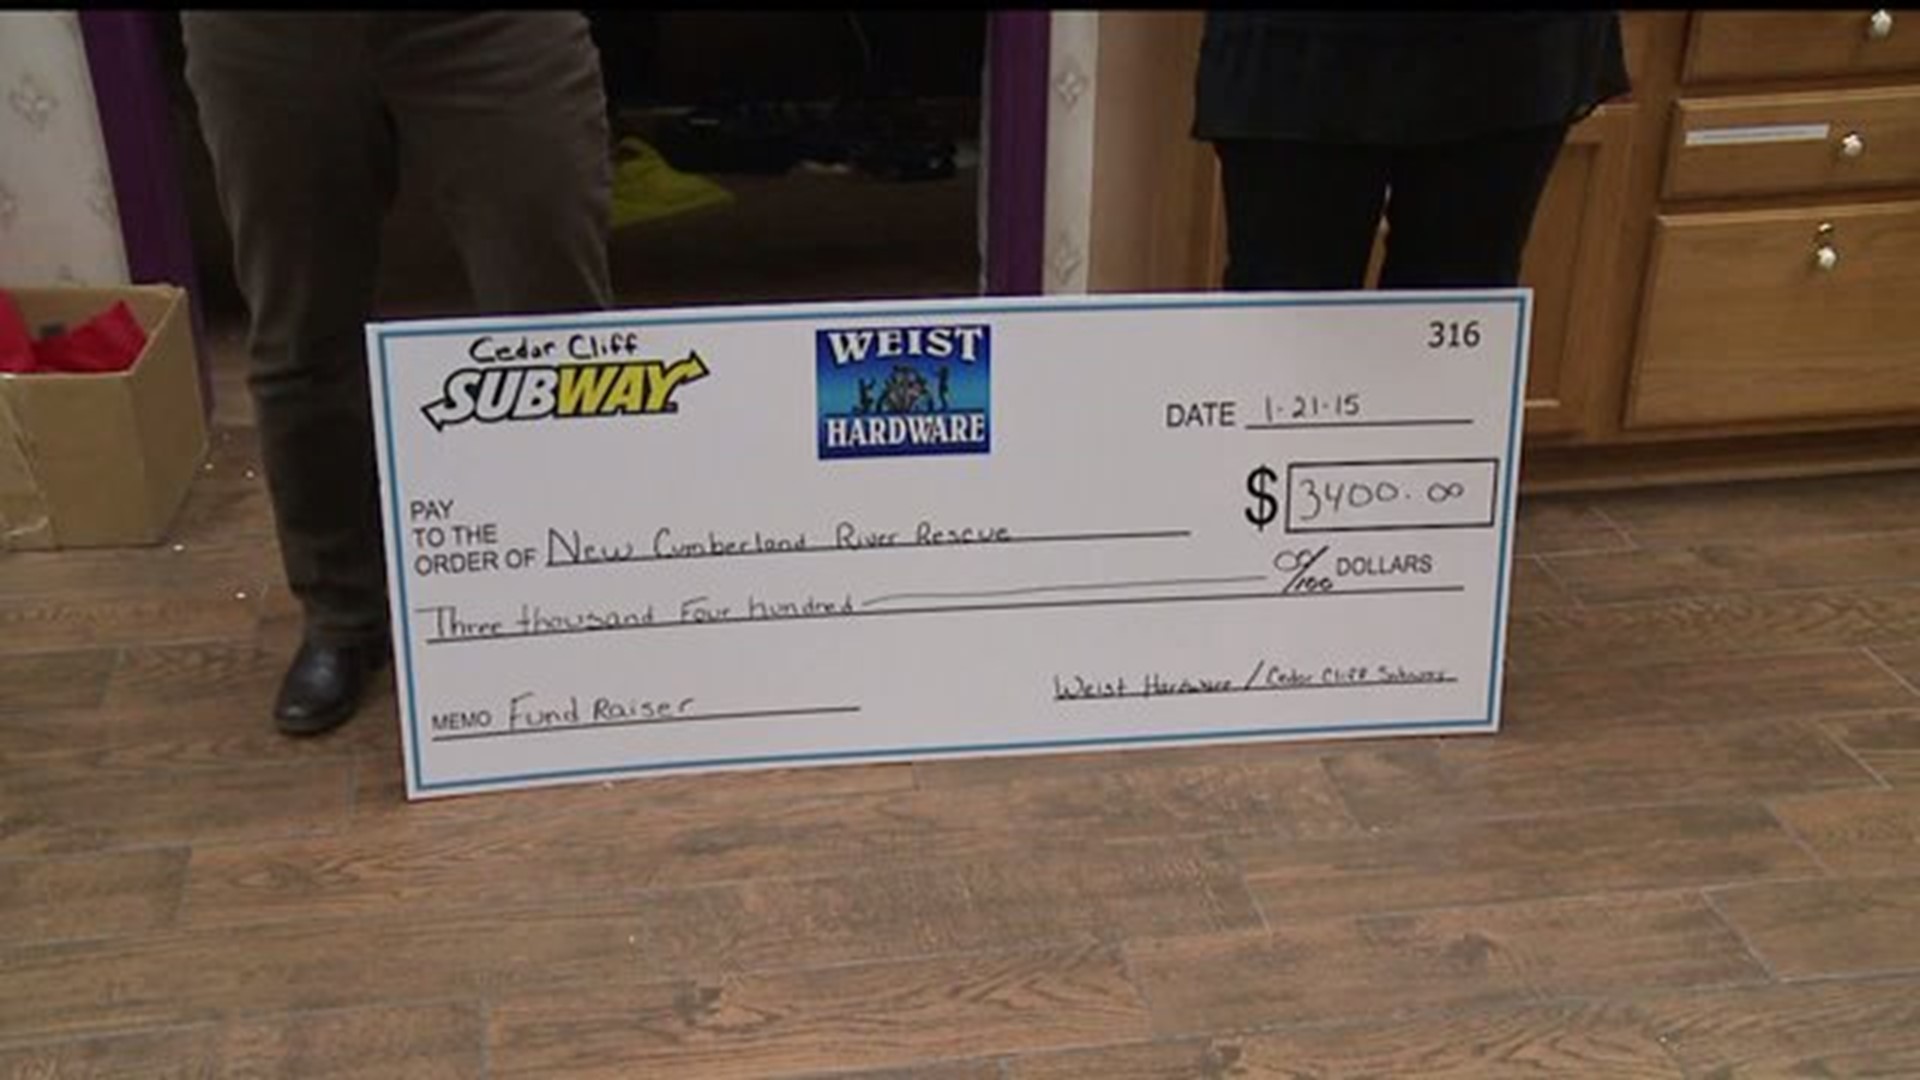 Local businesses present check to New Cumberland River Rescue